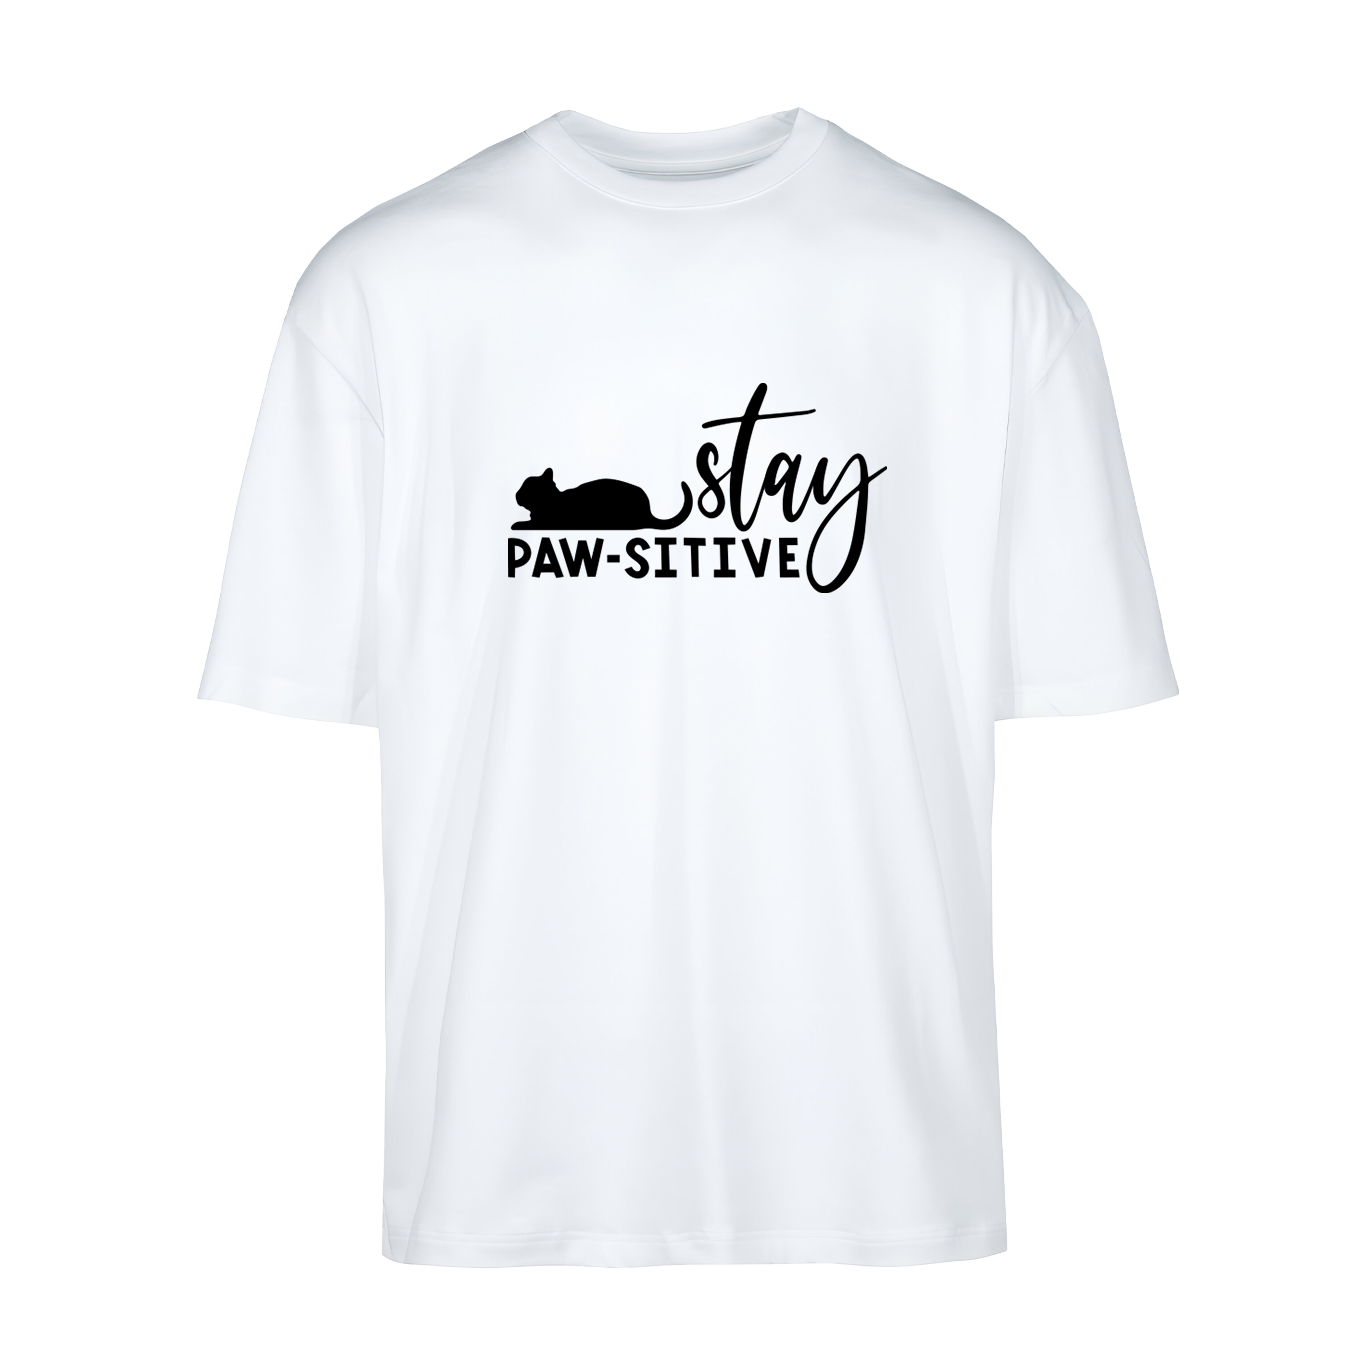 T-shirt "Stay Pawsitive"